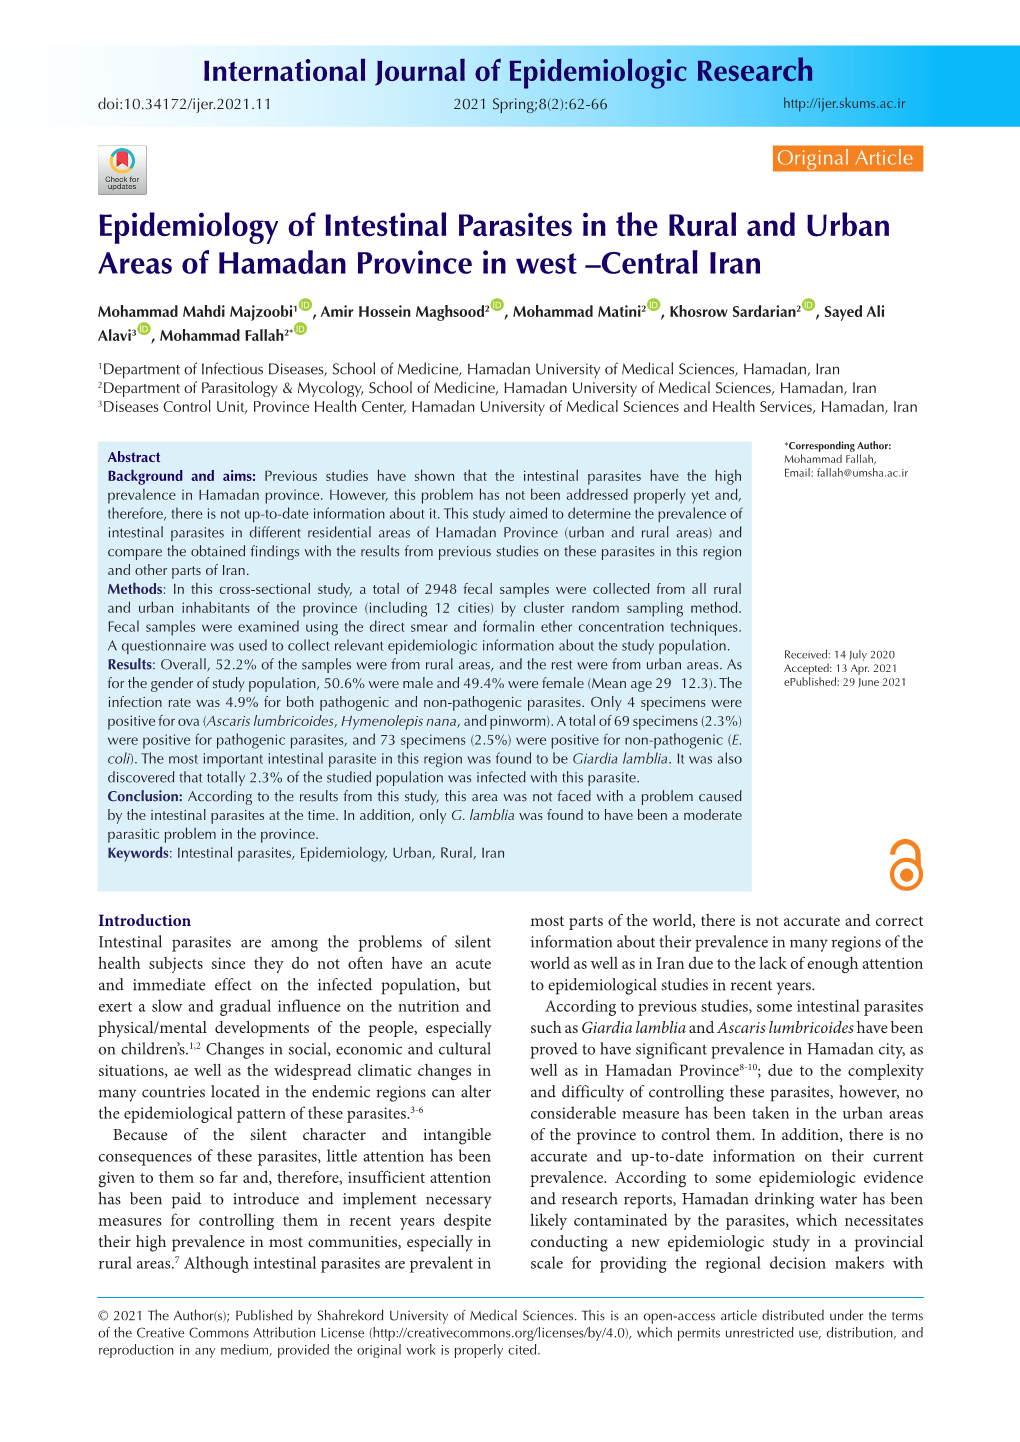 Epidemiology of Intestinal Parasites in the Rural and Urban Areas of Hamadan Province in West –Central Iran